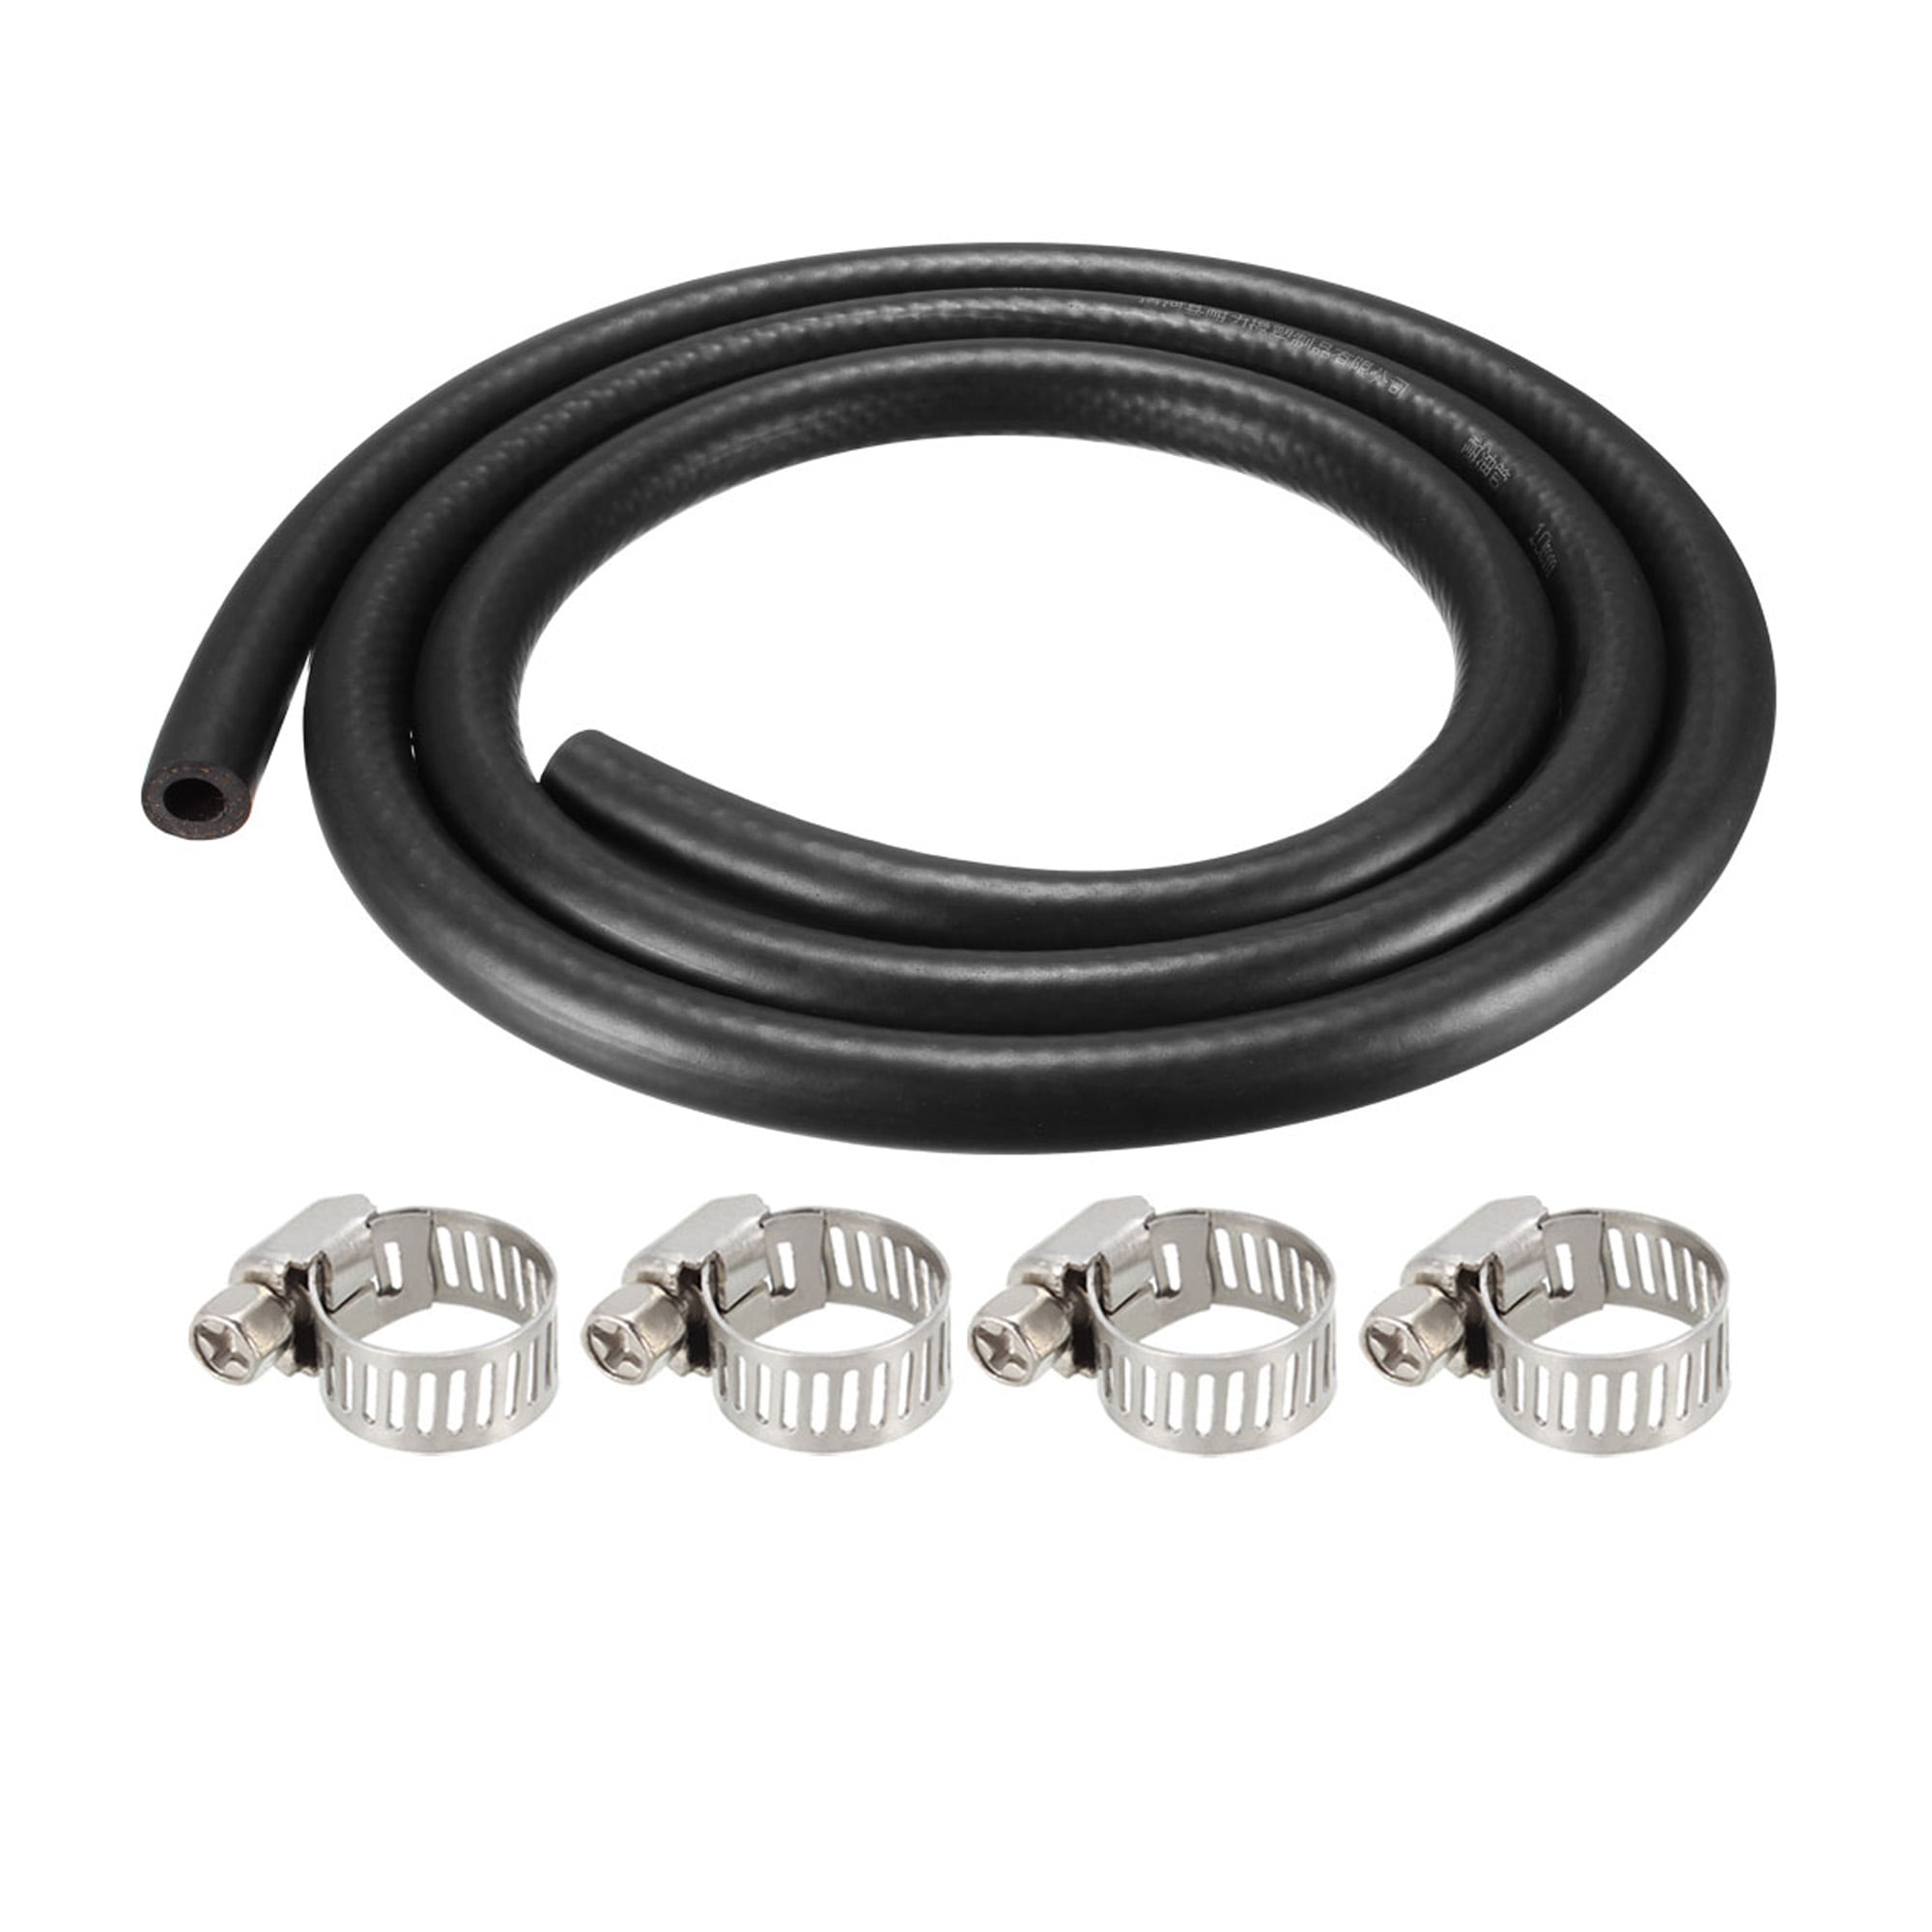 sourcing map Fuel Line Hose Rubber 10mm I.D 1.8M/6Ft Diesel Petrol Hose Engine Pipe Tubing with 4 Clamps 